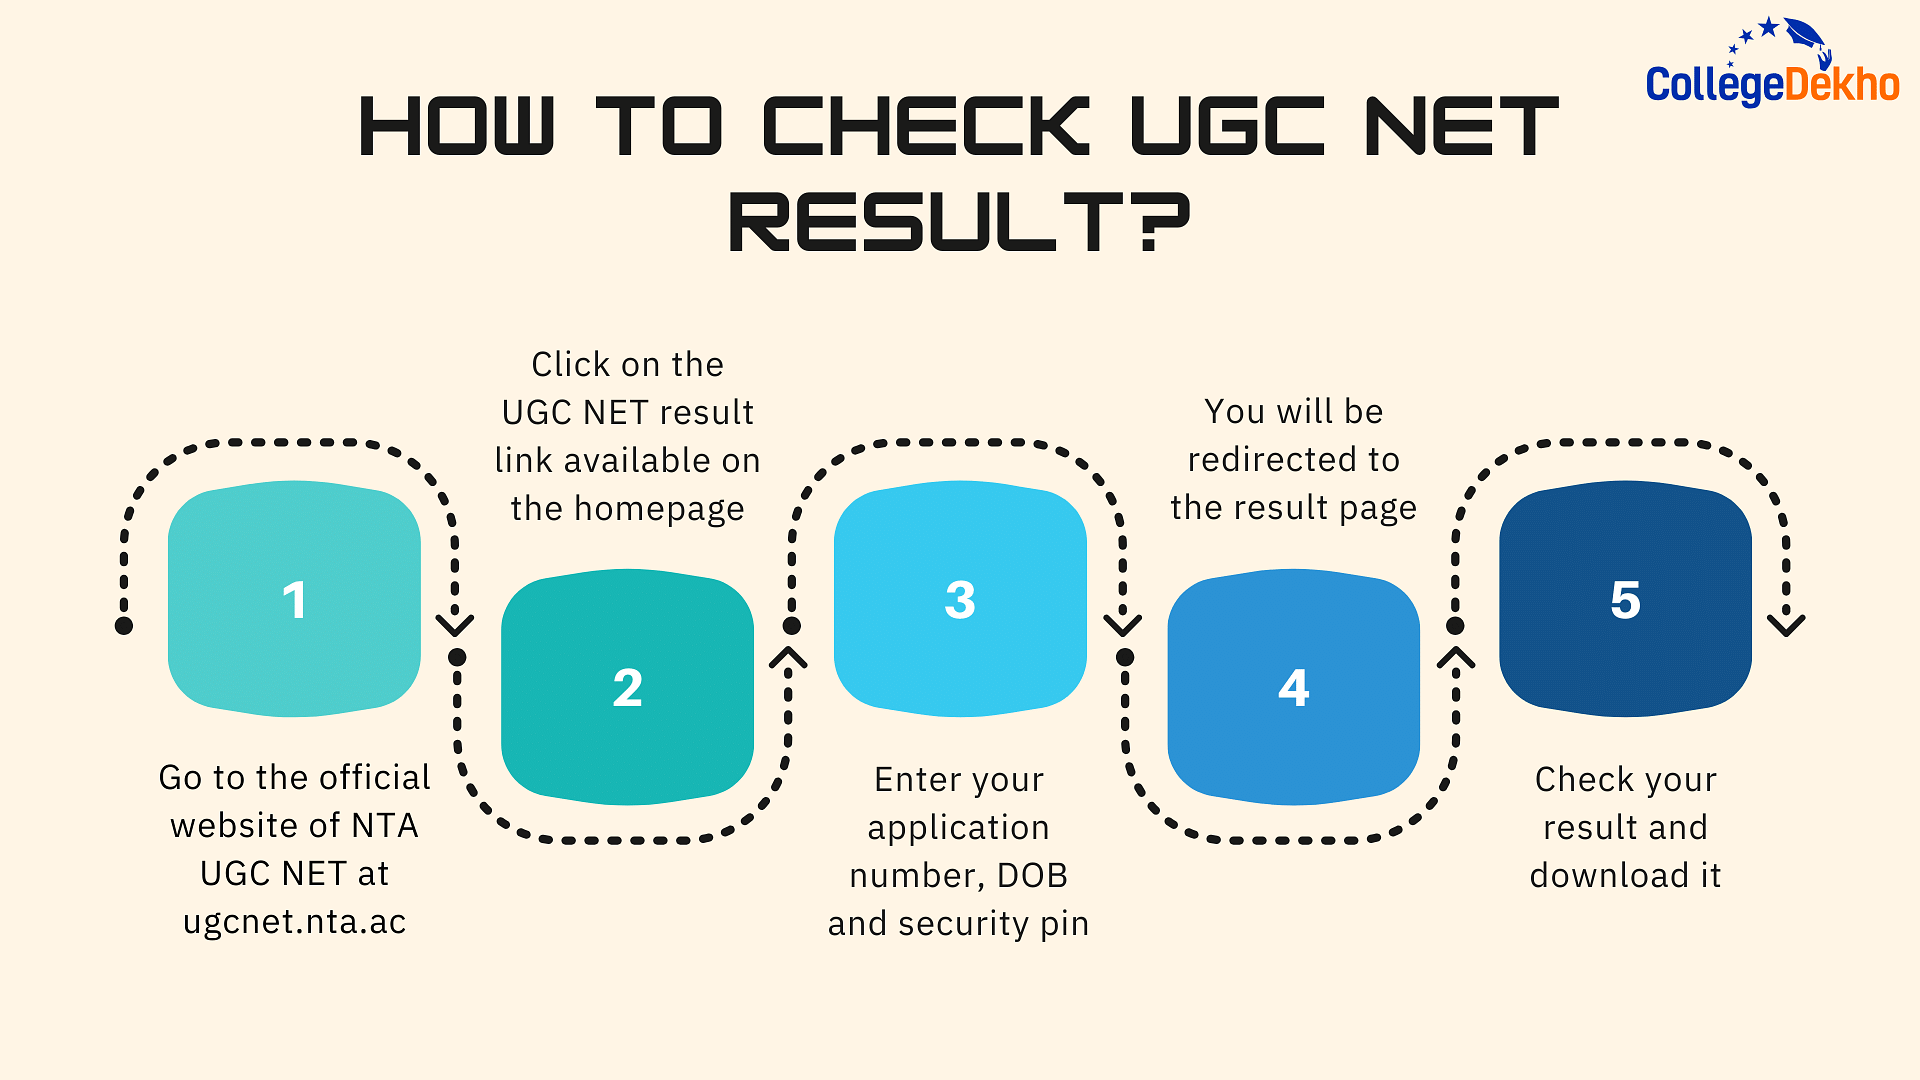 How to Check UGC NET Result